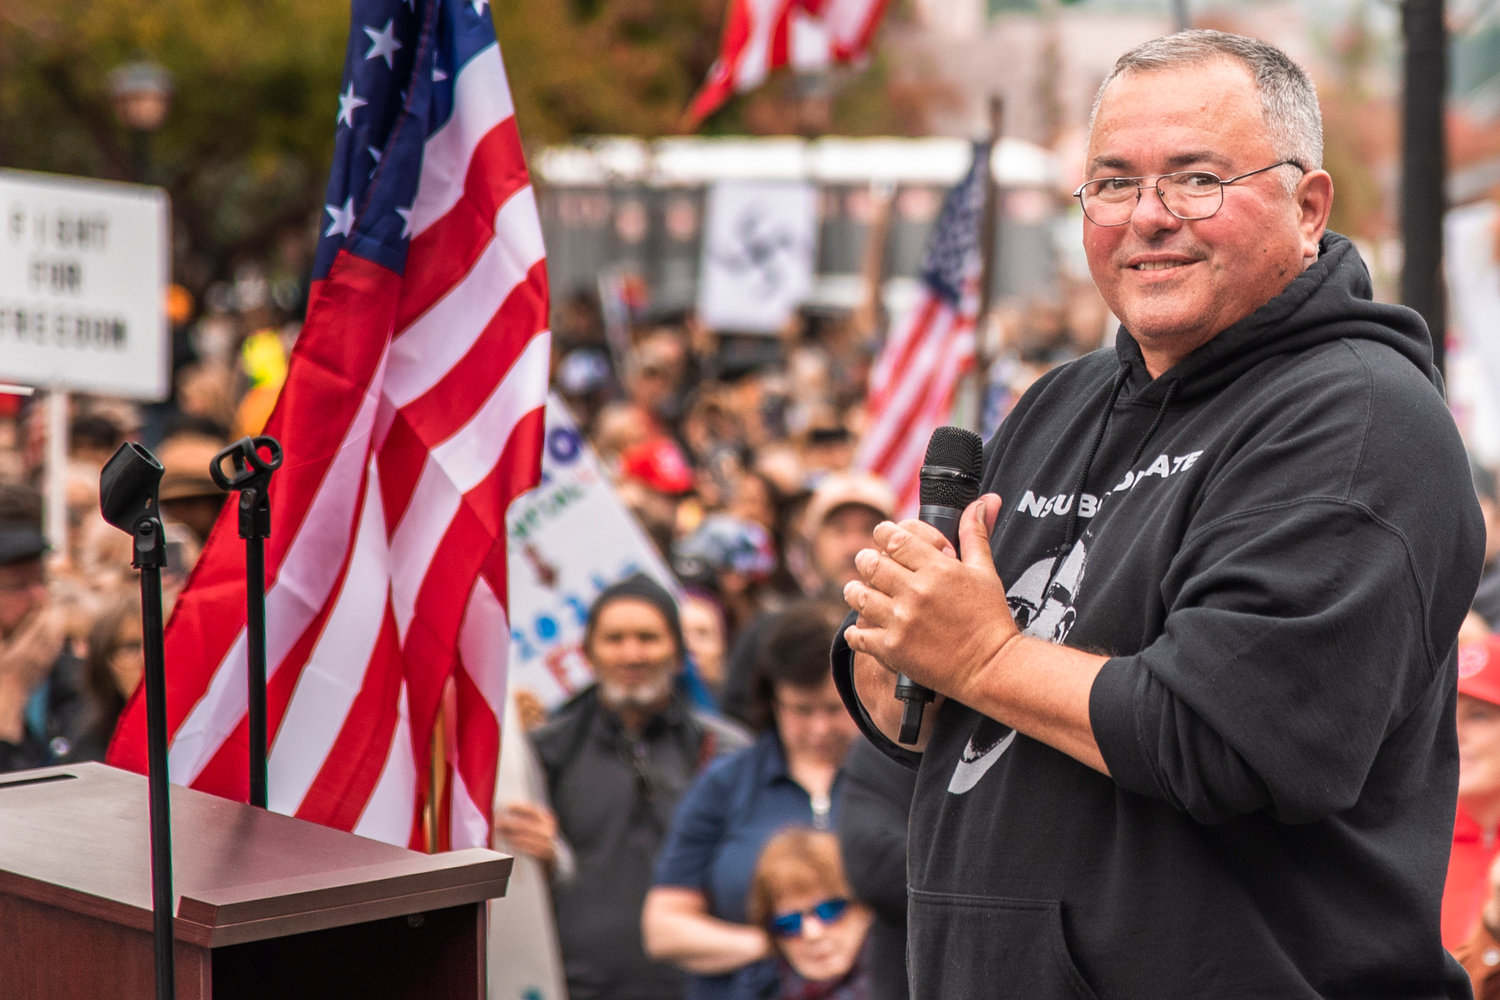 Loren Culp smiles while addressing crowds during a “Medical Freedom Rally” in Olympia on Sunday outside the Washington State Capitol Building.